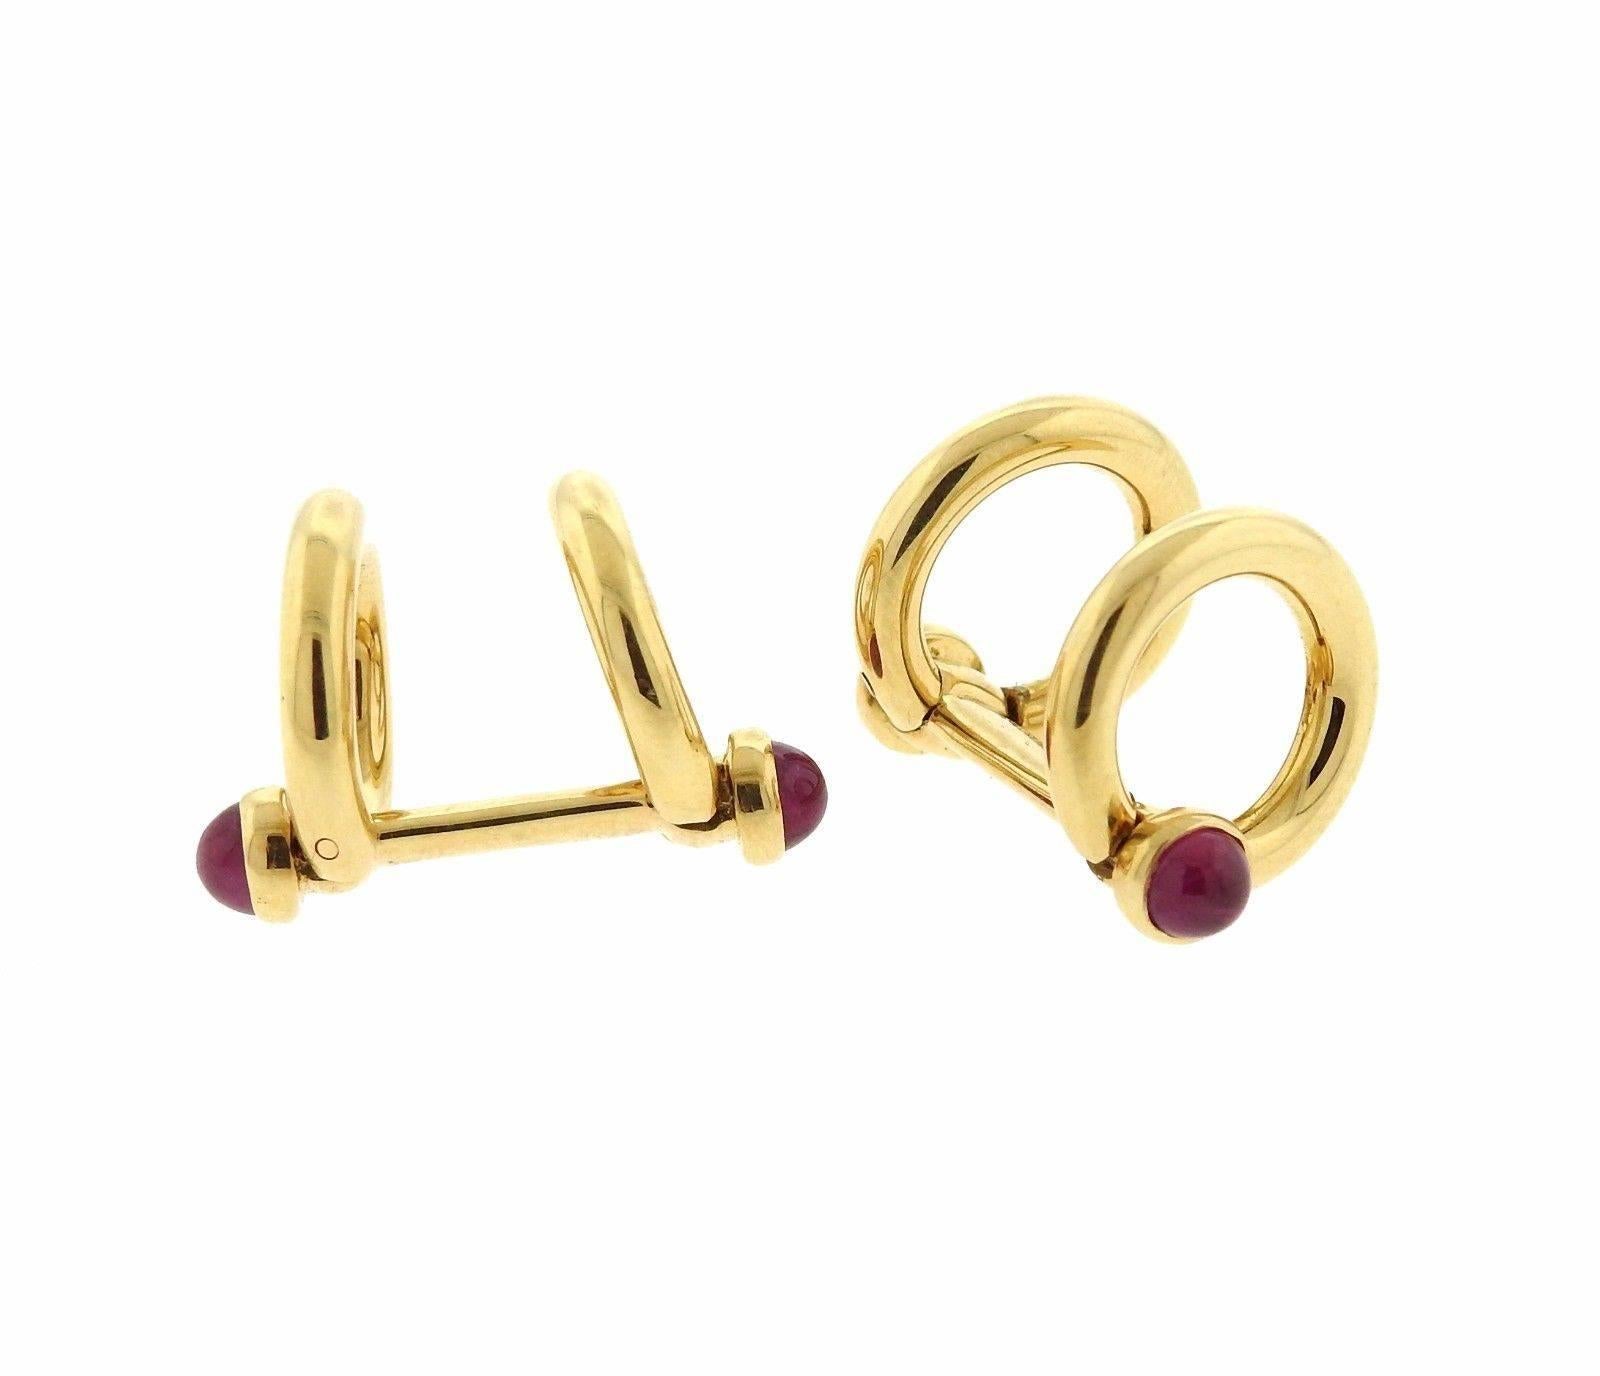 A pair of 18k gold cufflinks set with ruby cabochons.  Cufflink tops measure 13.7mm in diameter and weigh 13.9 grams.  Marked: Suna 18K 7447 8.